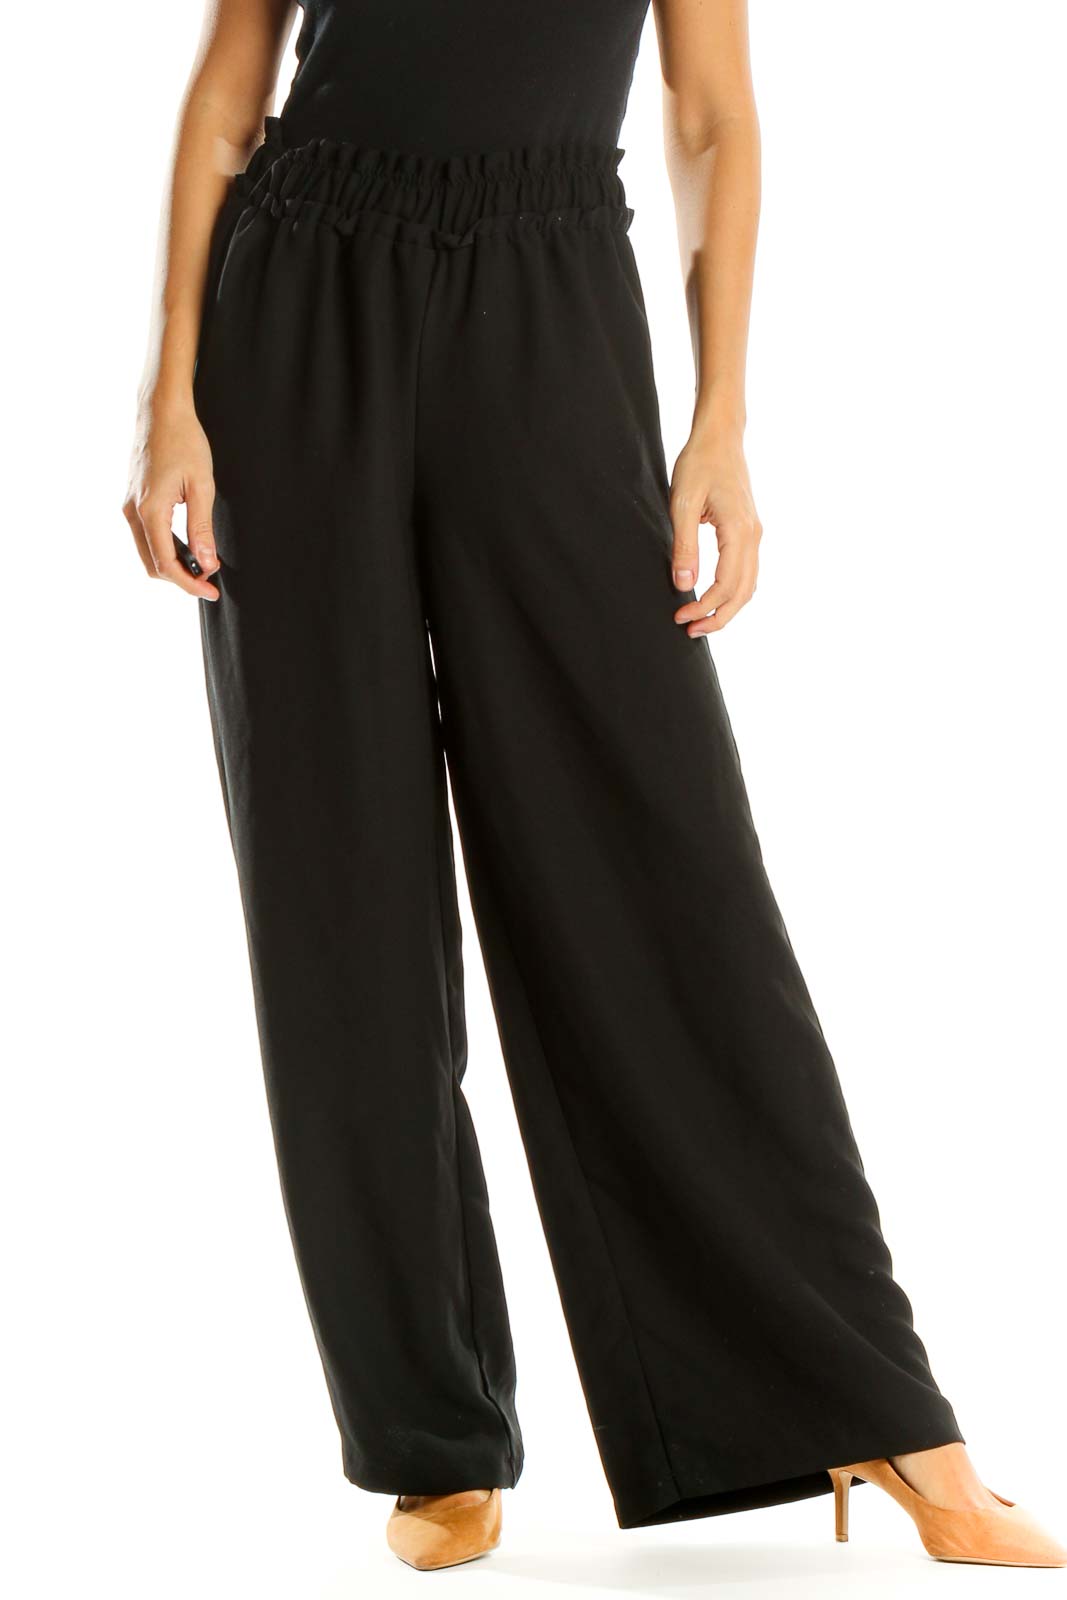 Black Solid Classic Pants Front